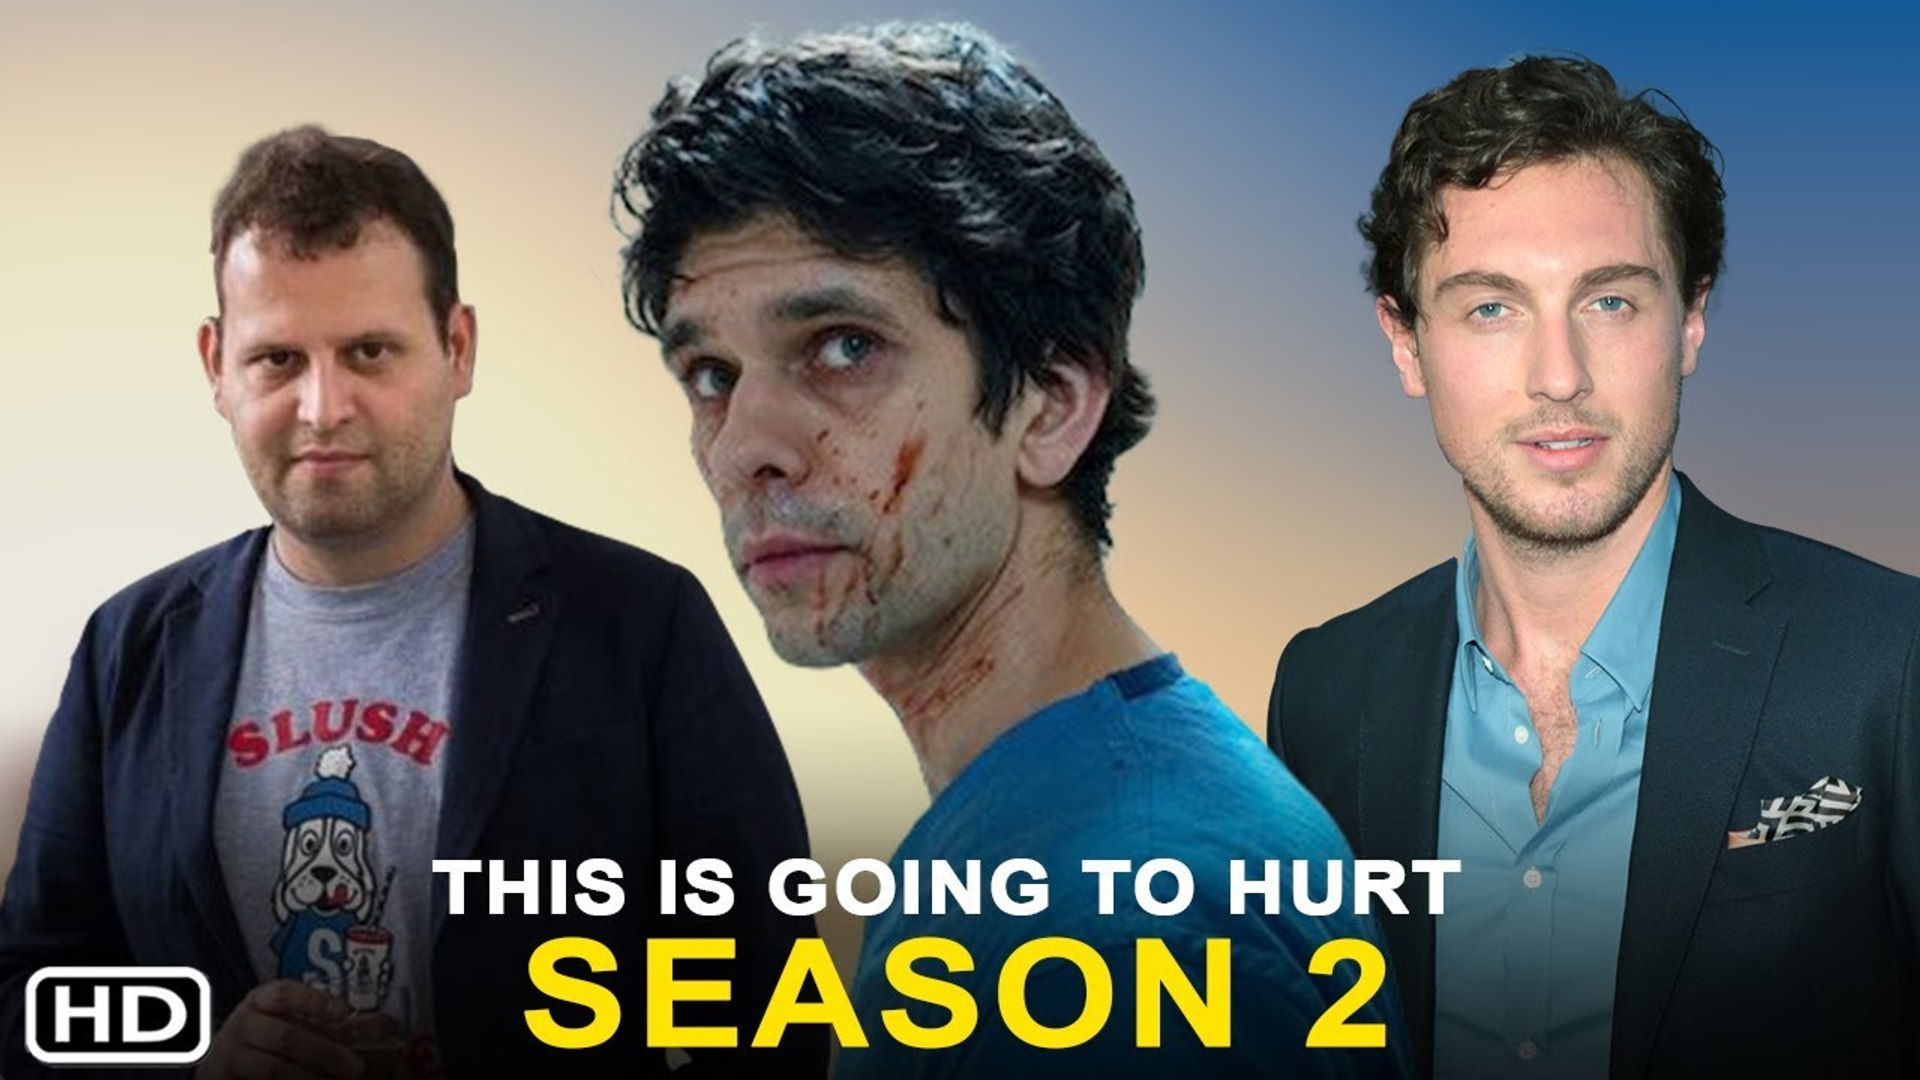 This Is Going To Hurt Season 2 (2022) BBC, Release Date, Trailer, Episode  1, Cast, Review, Ending - video Dailymotion